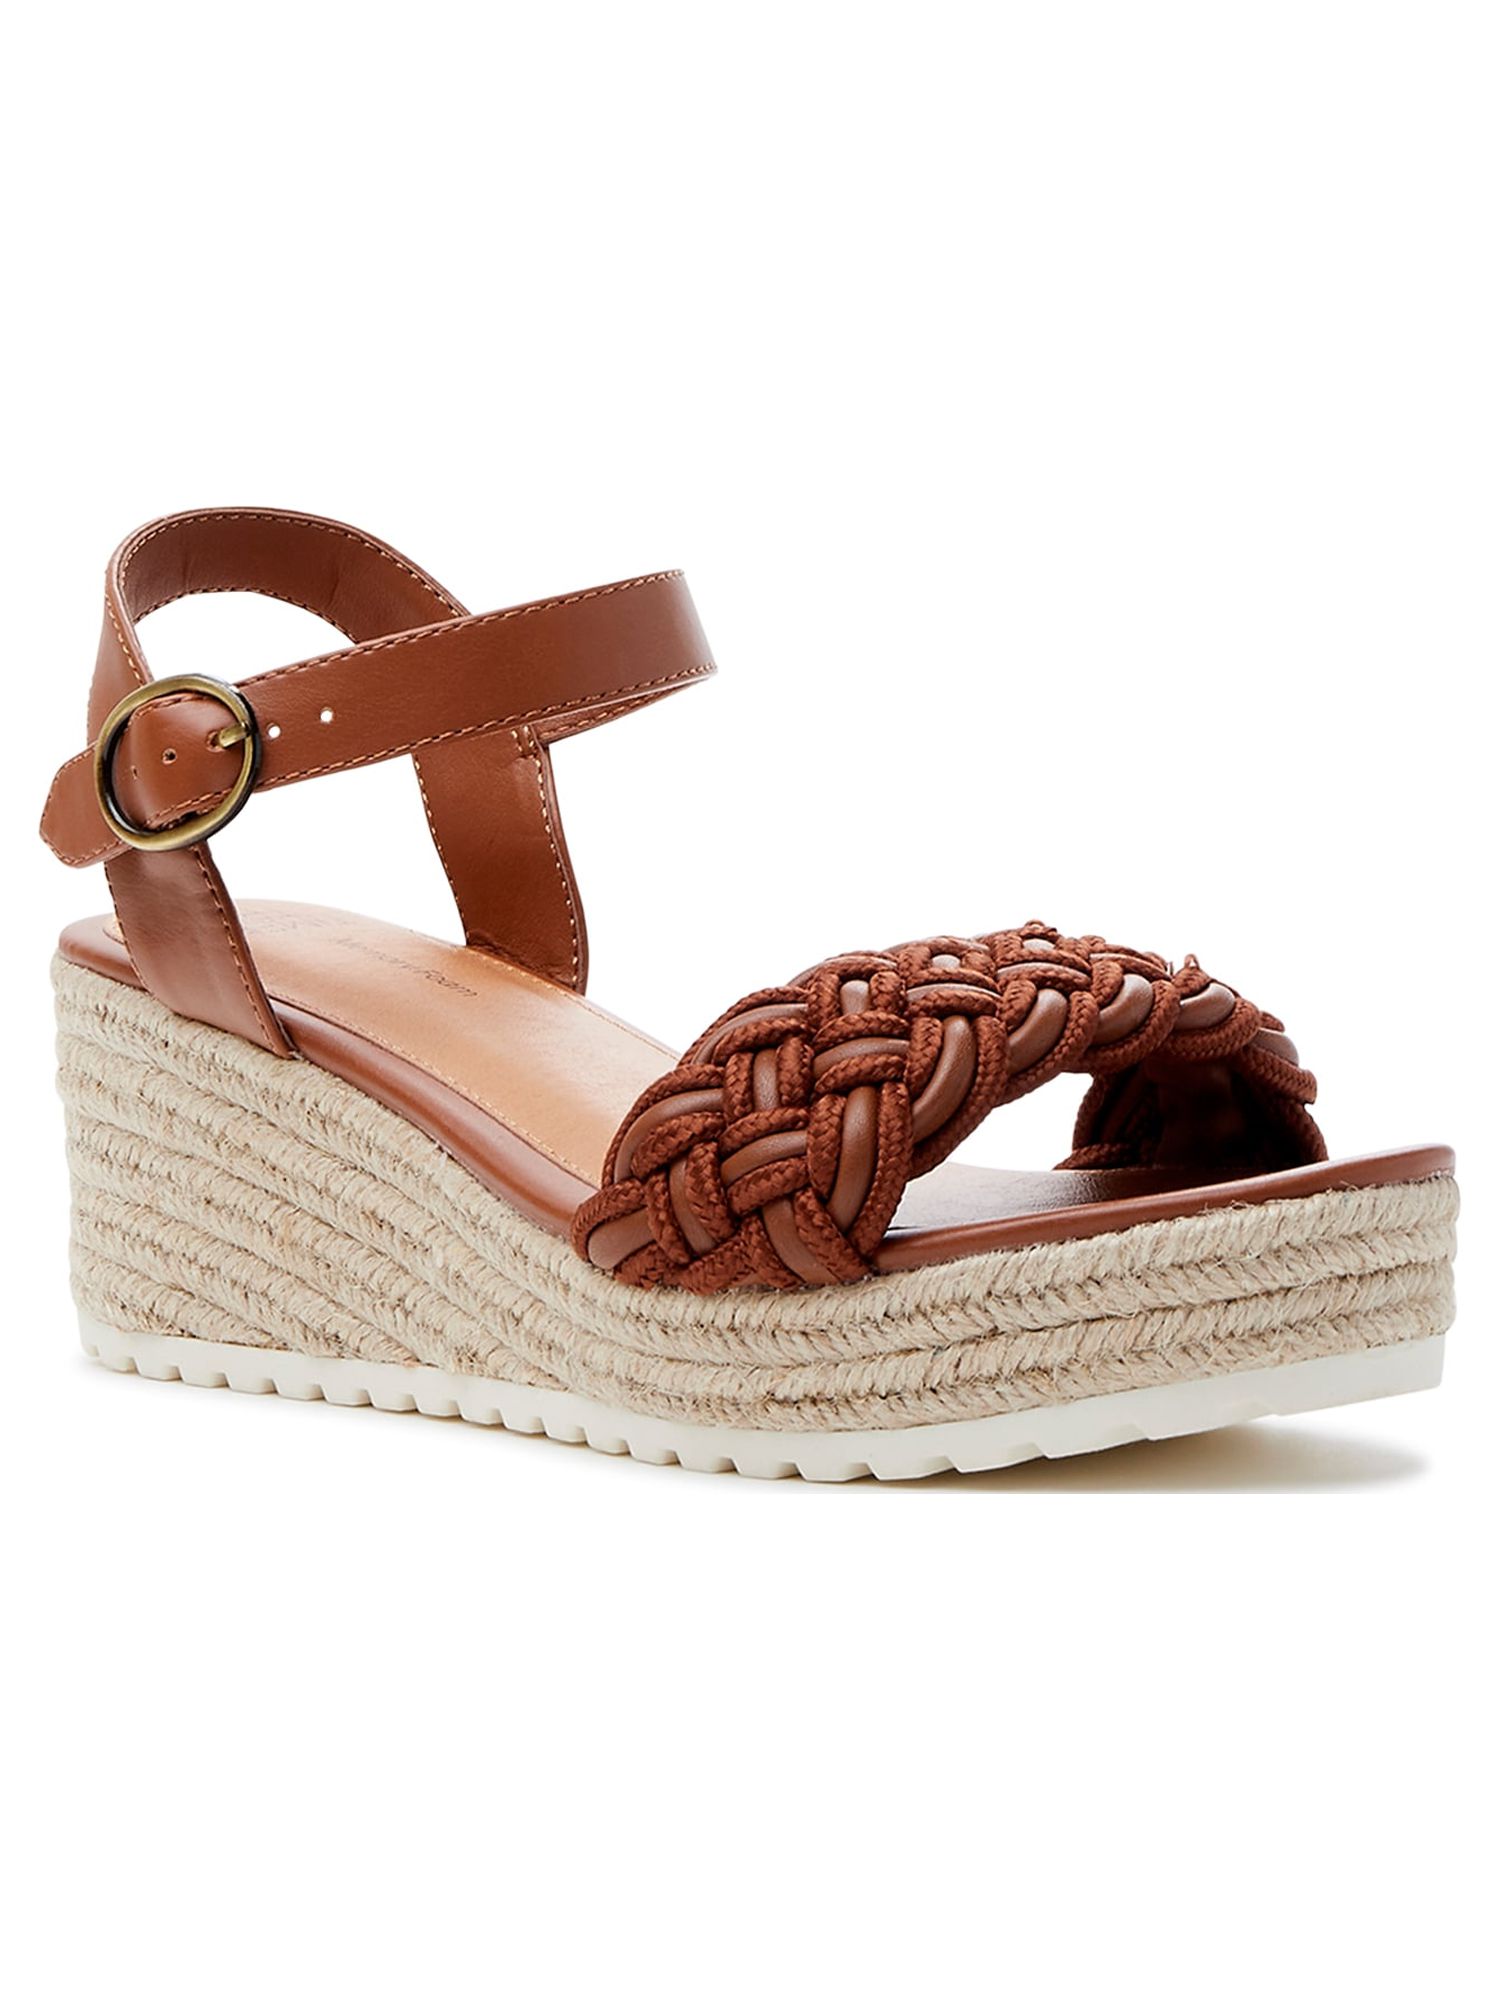 Time and Tru Women's Braided Wedge Sandals, Wide Width Available - image 1 of 5